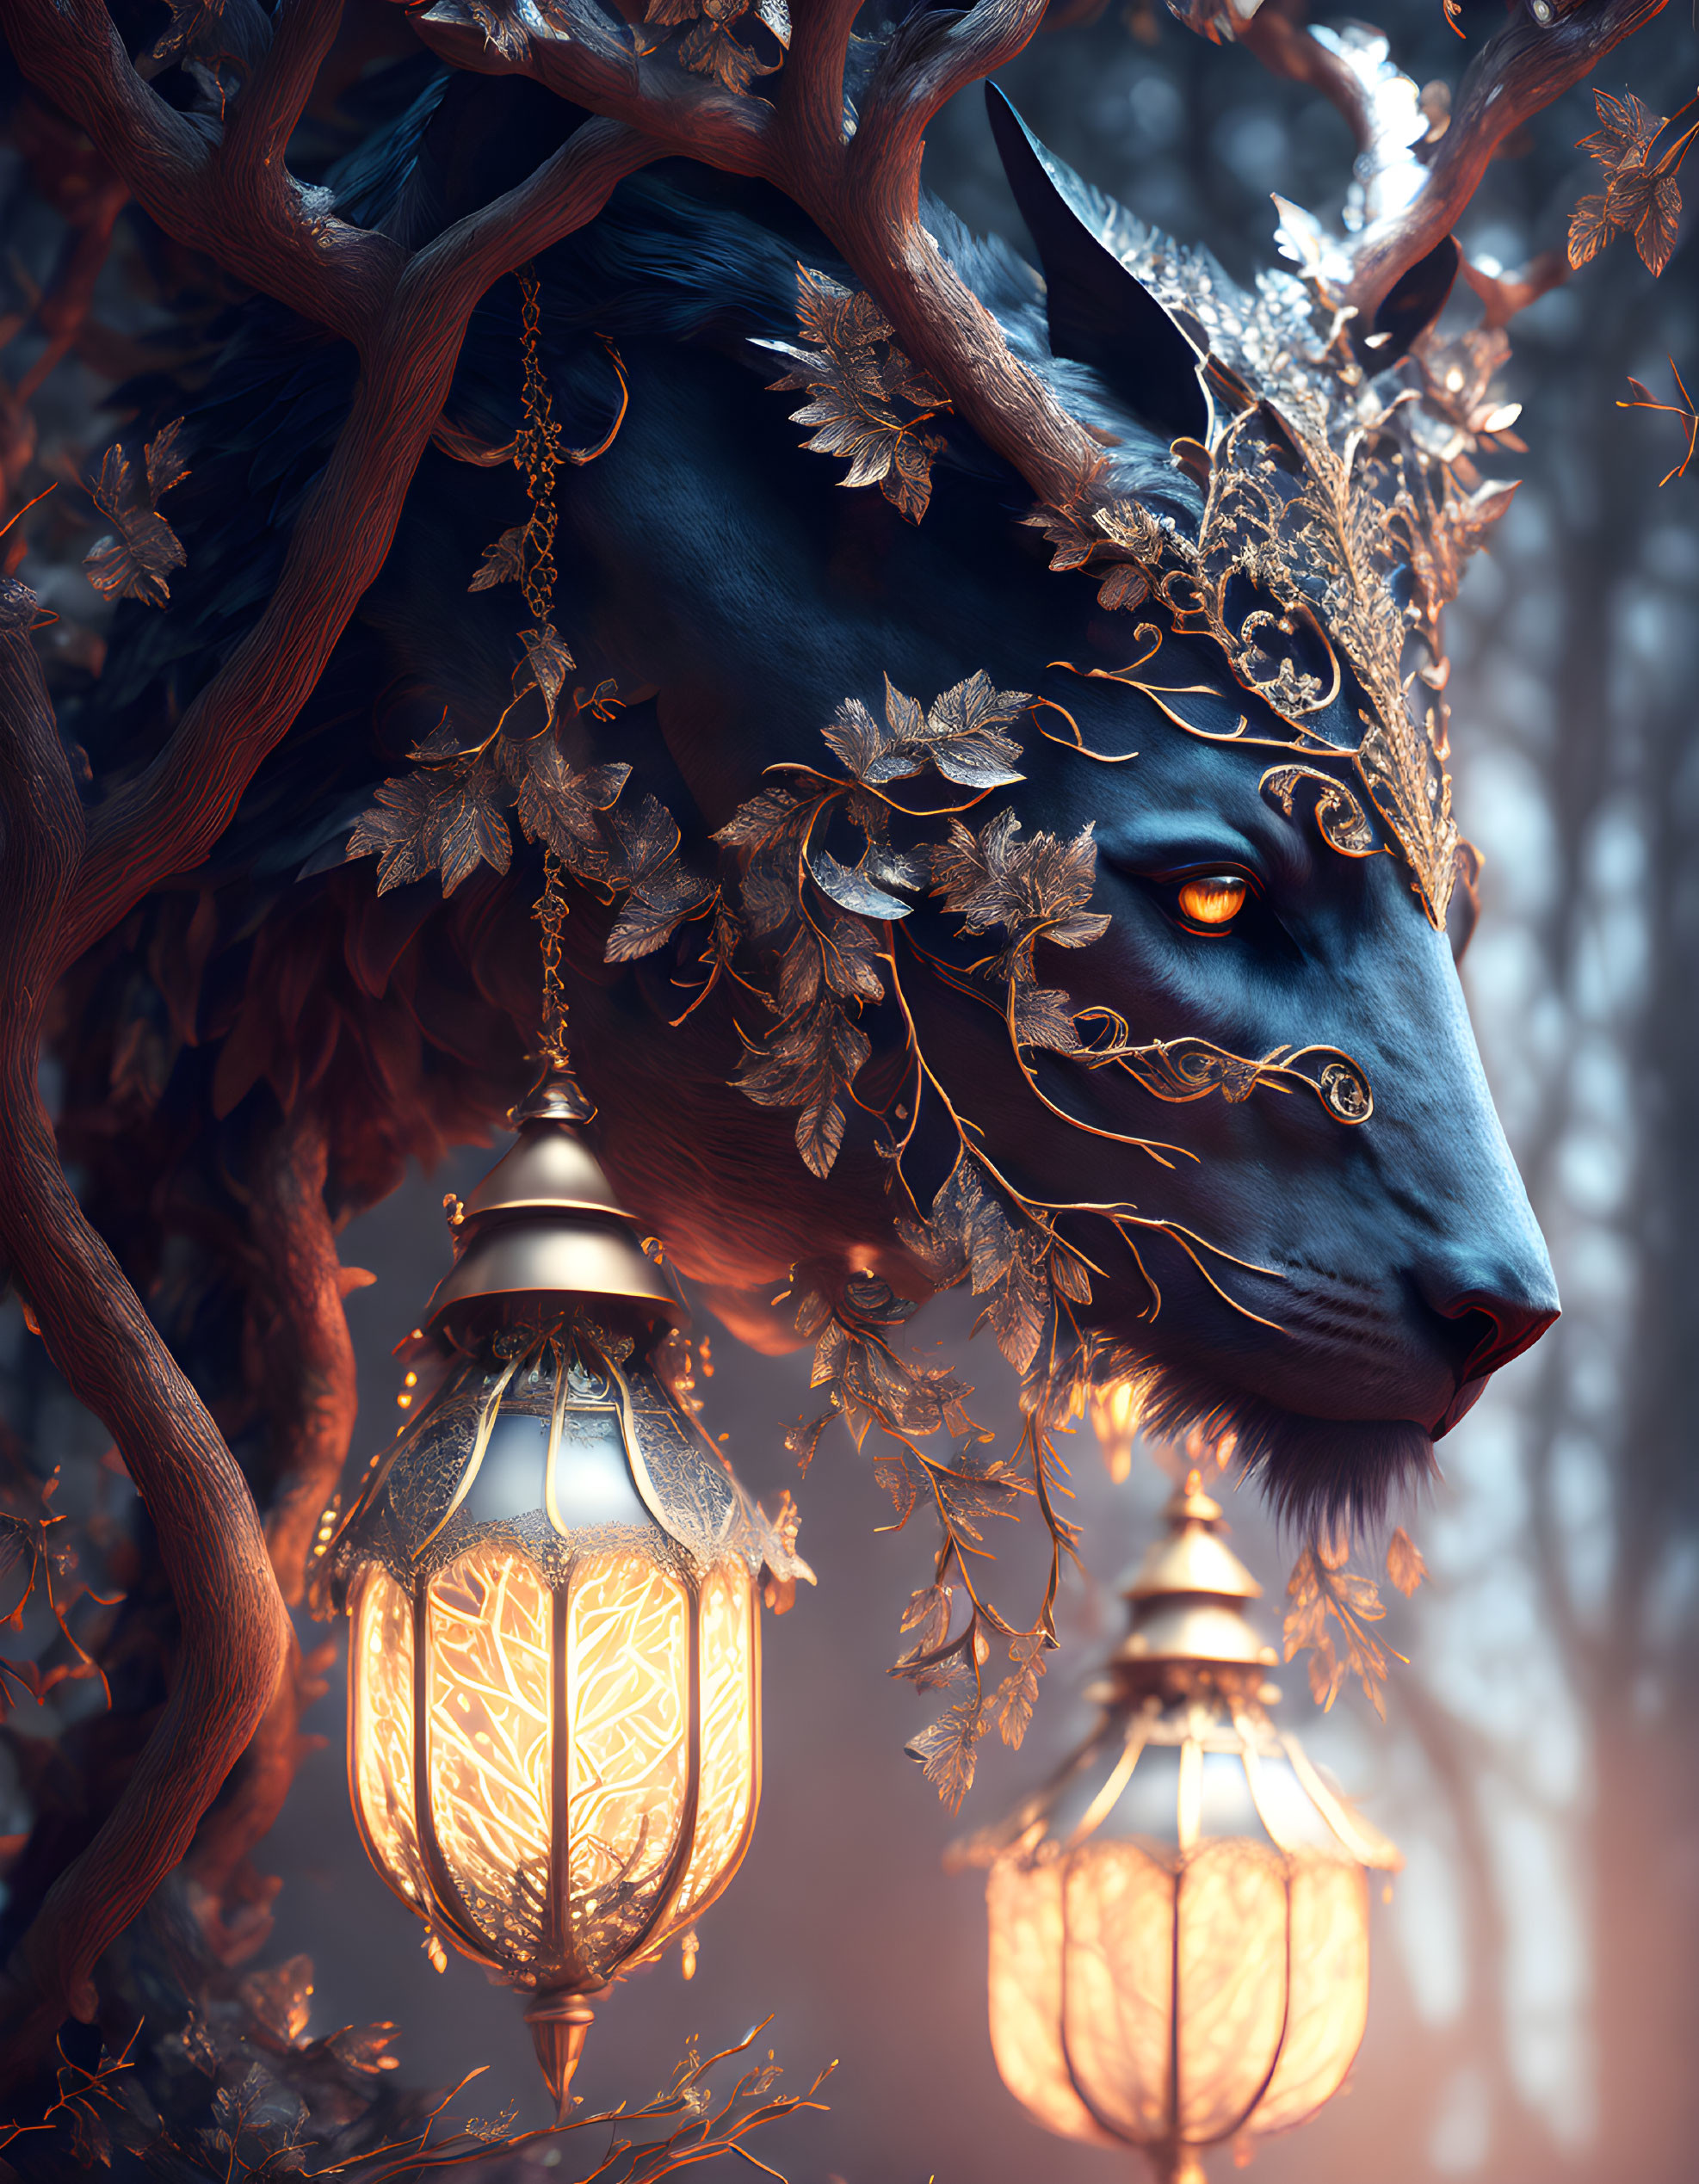 Black Panther with Gold Headpiece in Enchanted Forest Scene